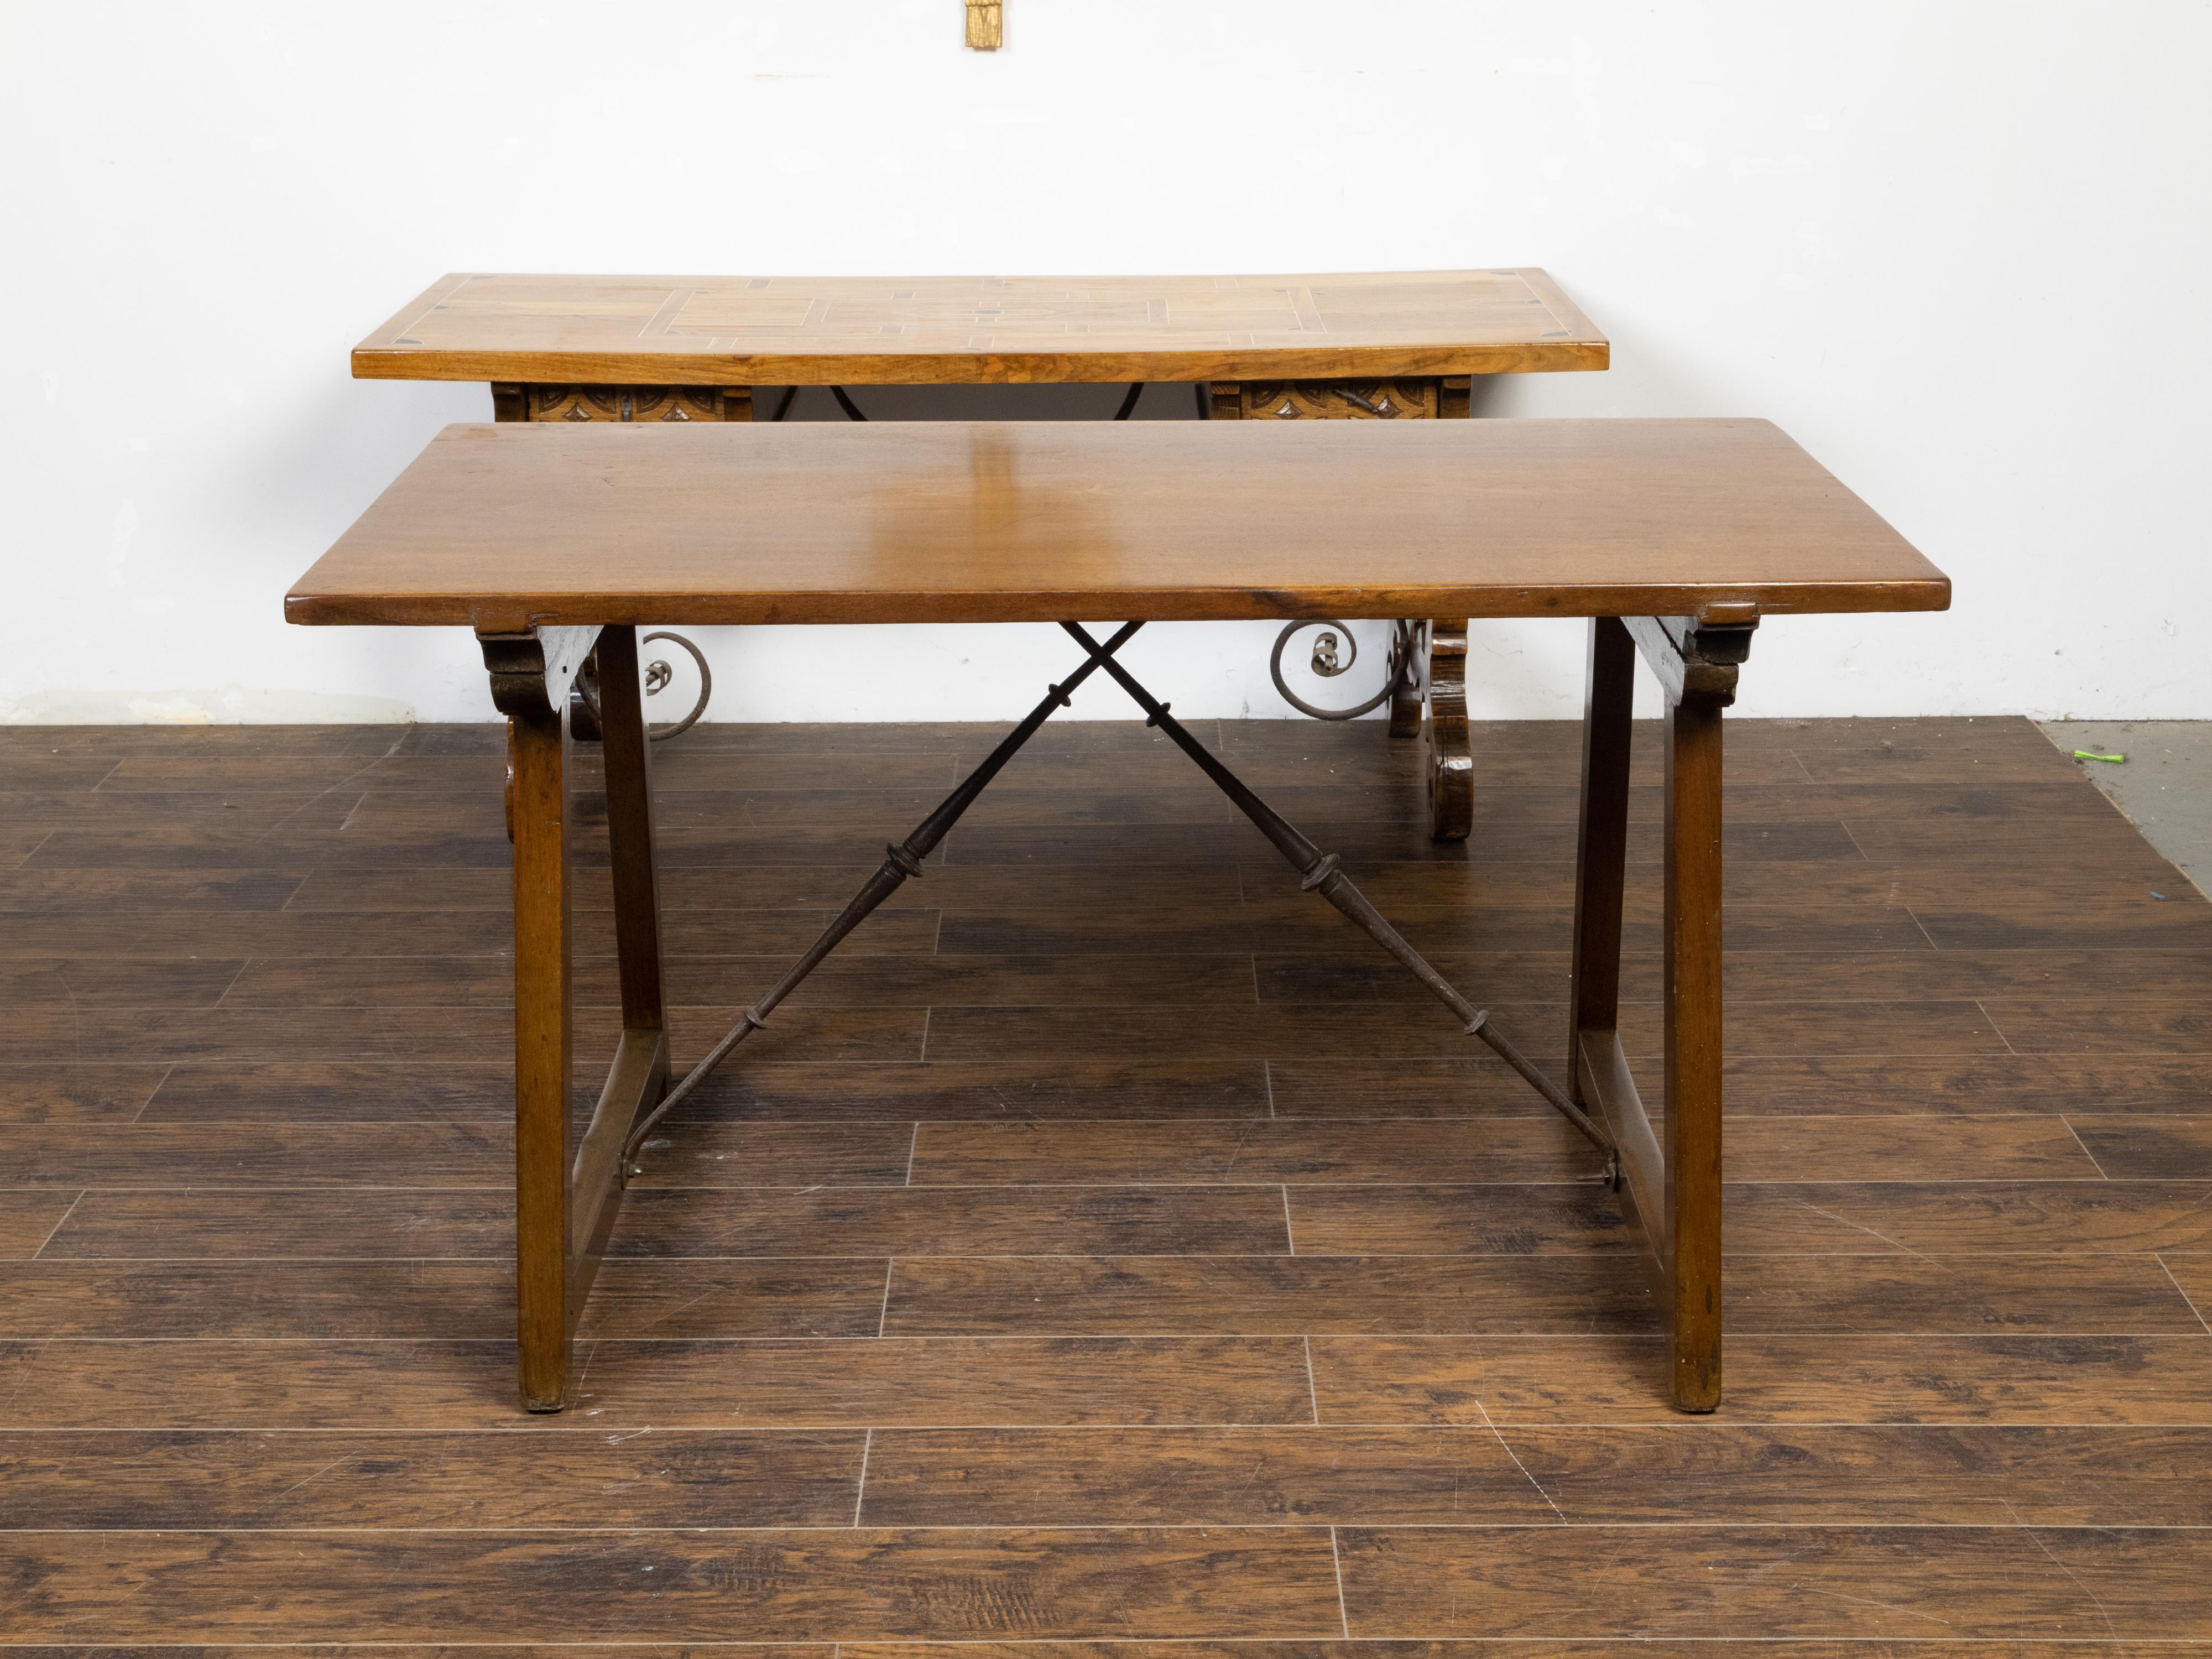 A French walnut console table from the 19th century, with trestle base and iron stretchers. Created in France during the 19th century, this walnut table features a rectangular top sitting above a trestle base made of splaying legs with low